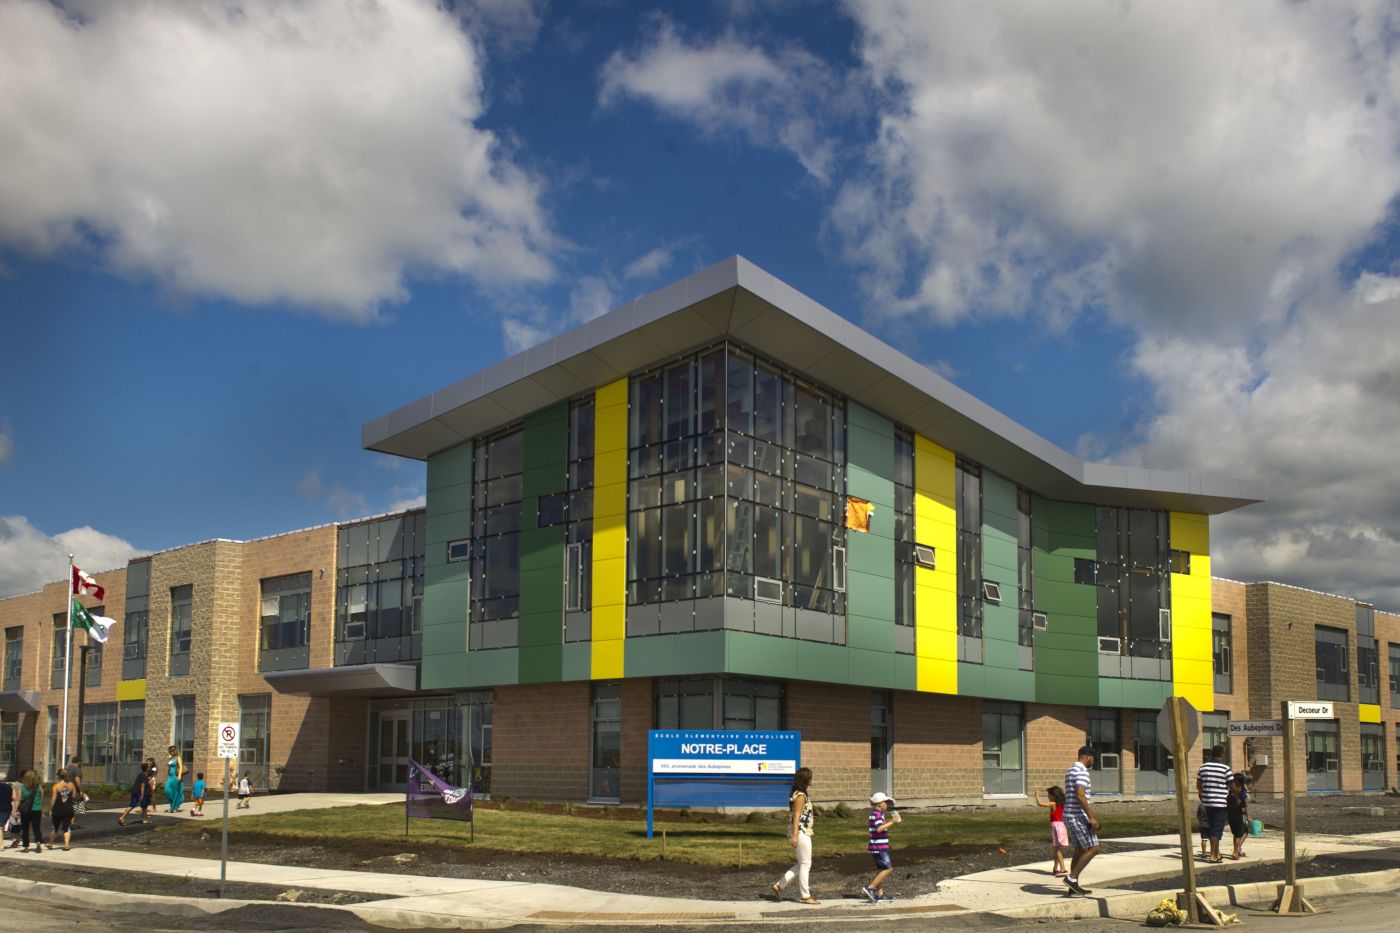 Colour photograph of a two-storey brick and glass building with coloured sections surrounding the glass. Children and parents walk around the building. In the centre, a blue and white sign bearing the name of the school.